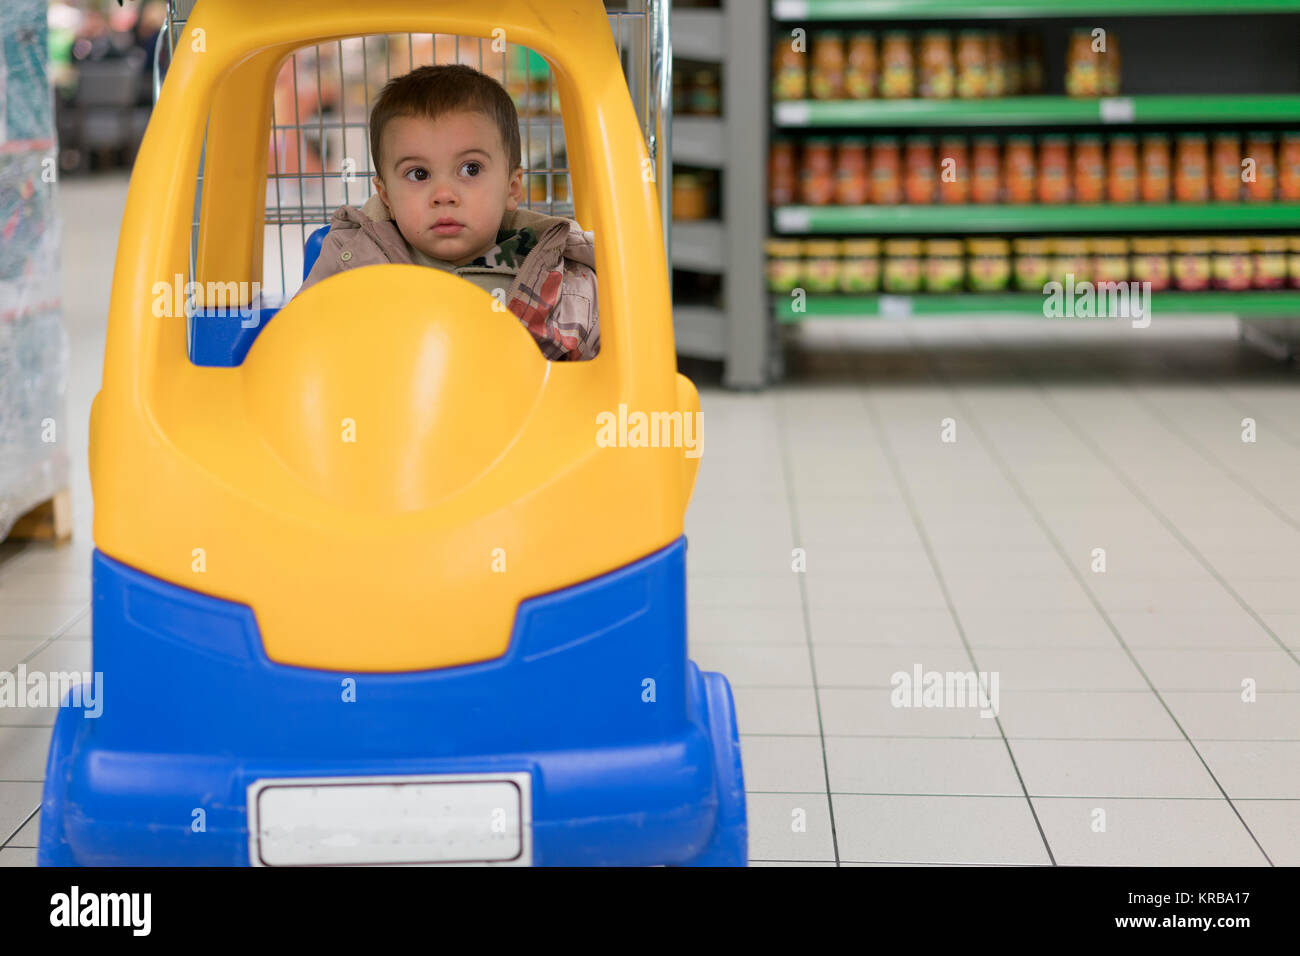 Toddler boy in a cart in the supermarket Stock Photo